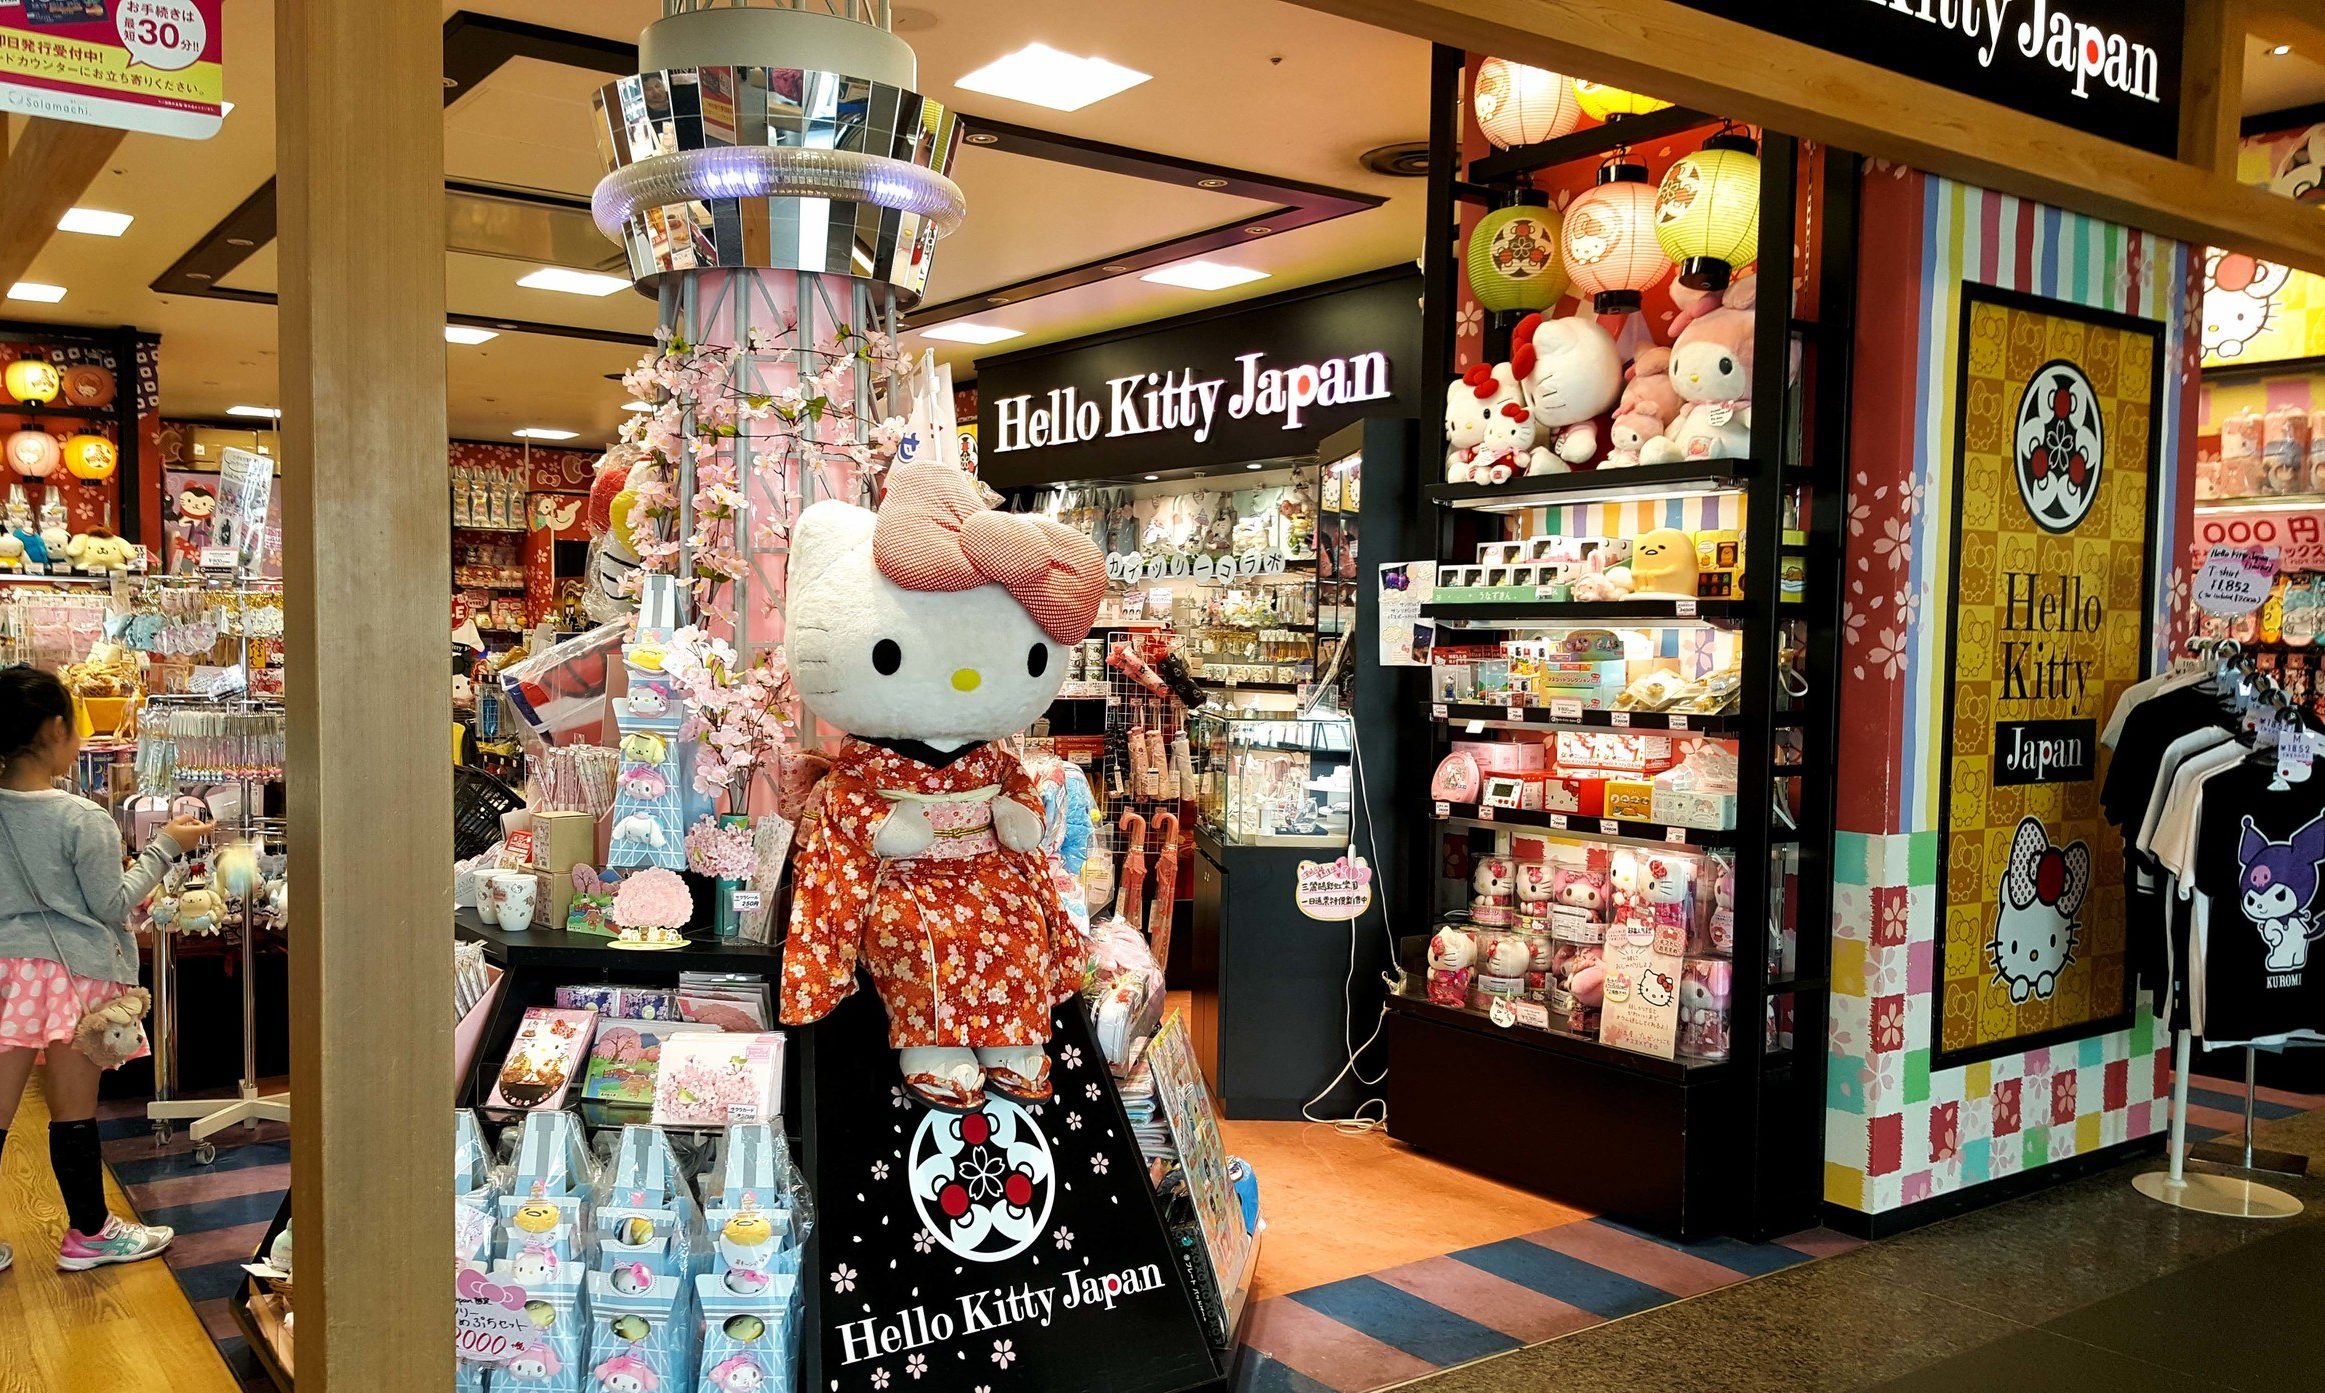 10 Things to Buy in Japan for Pasalubong – The Best Souvenirs from Japan